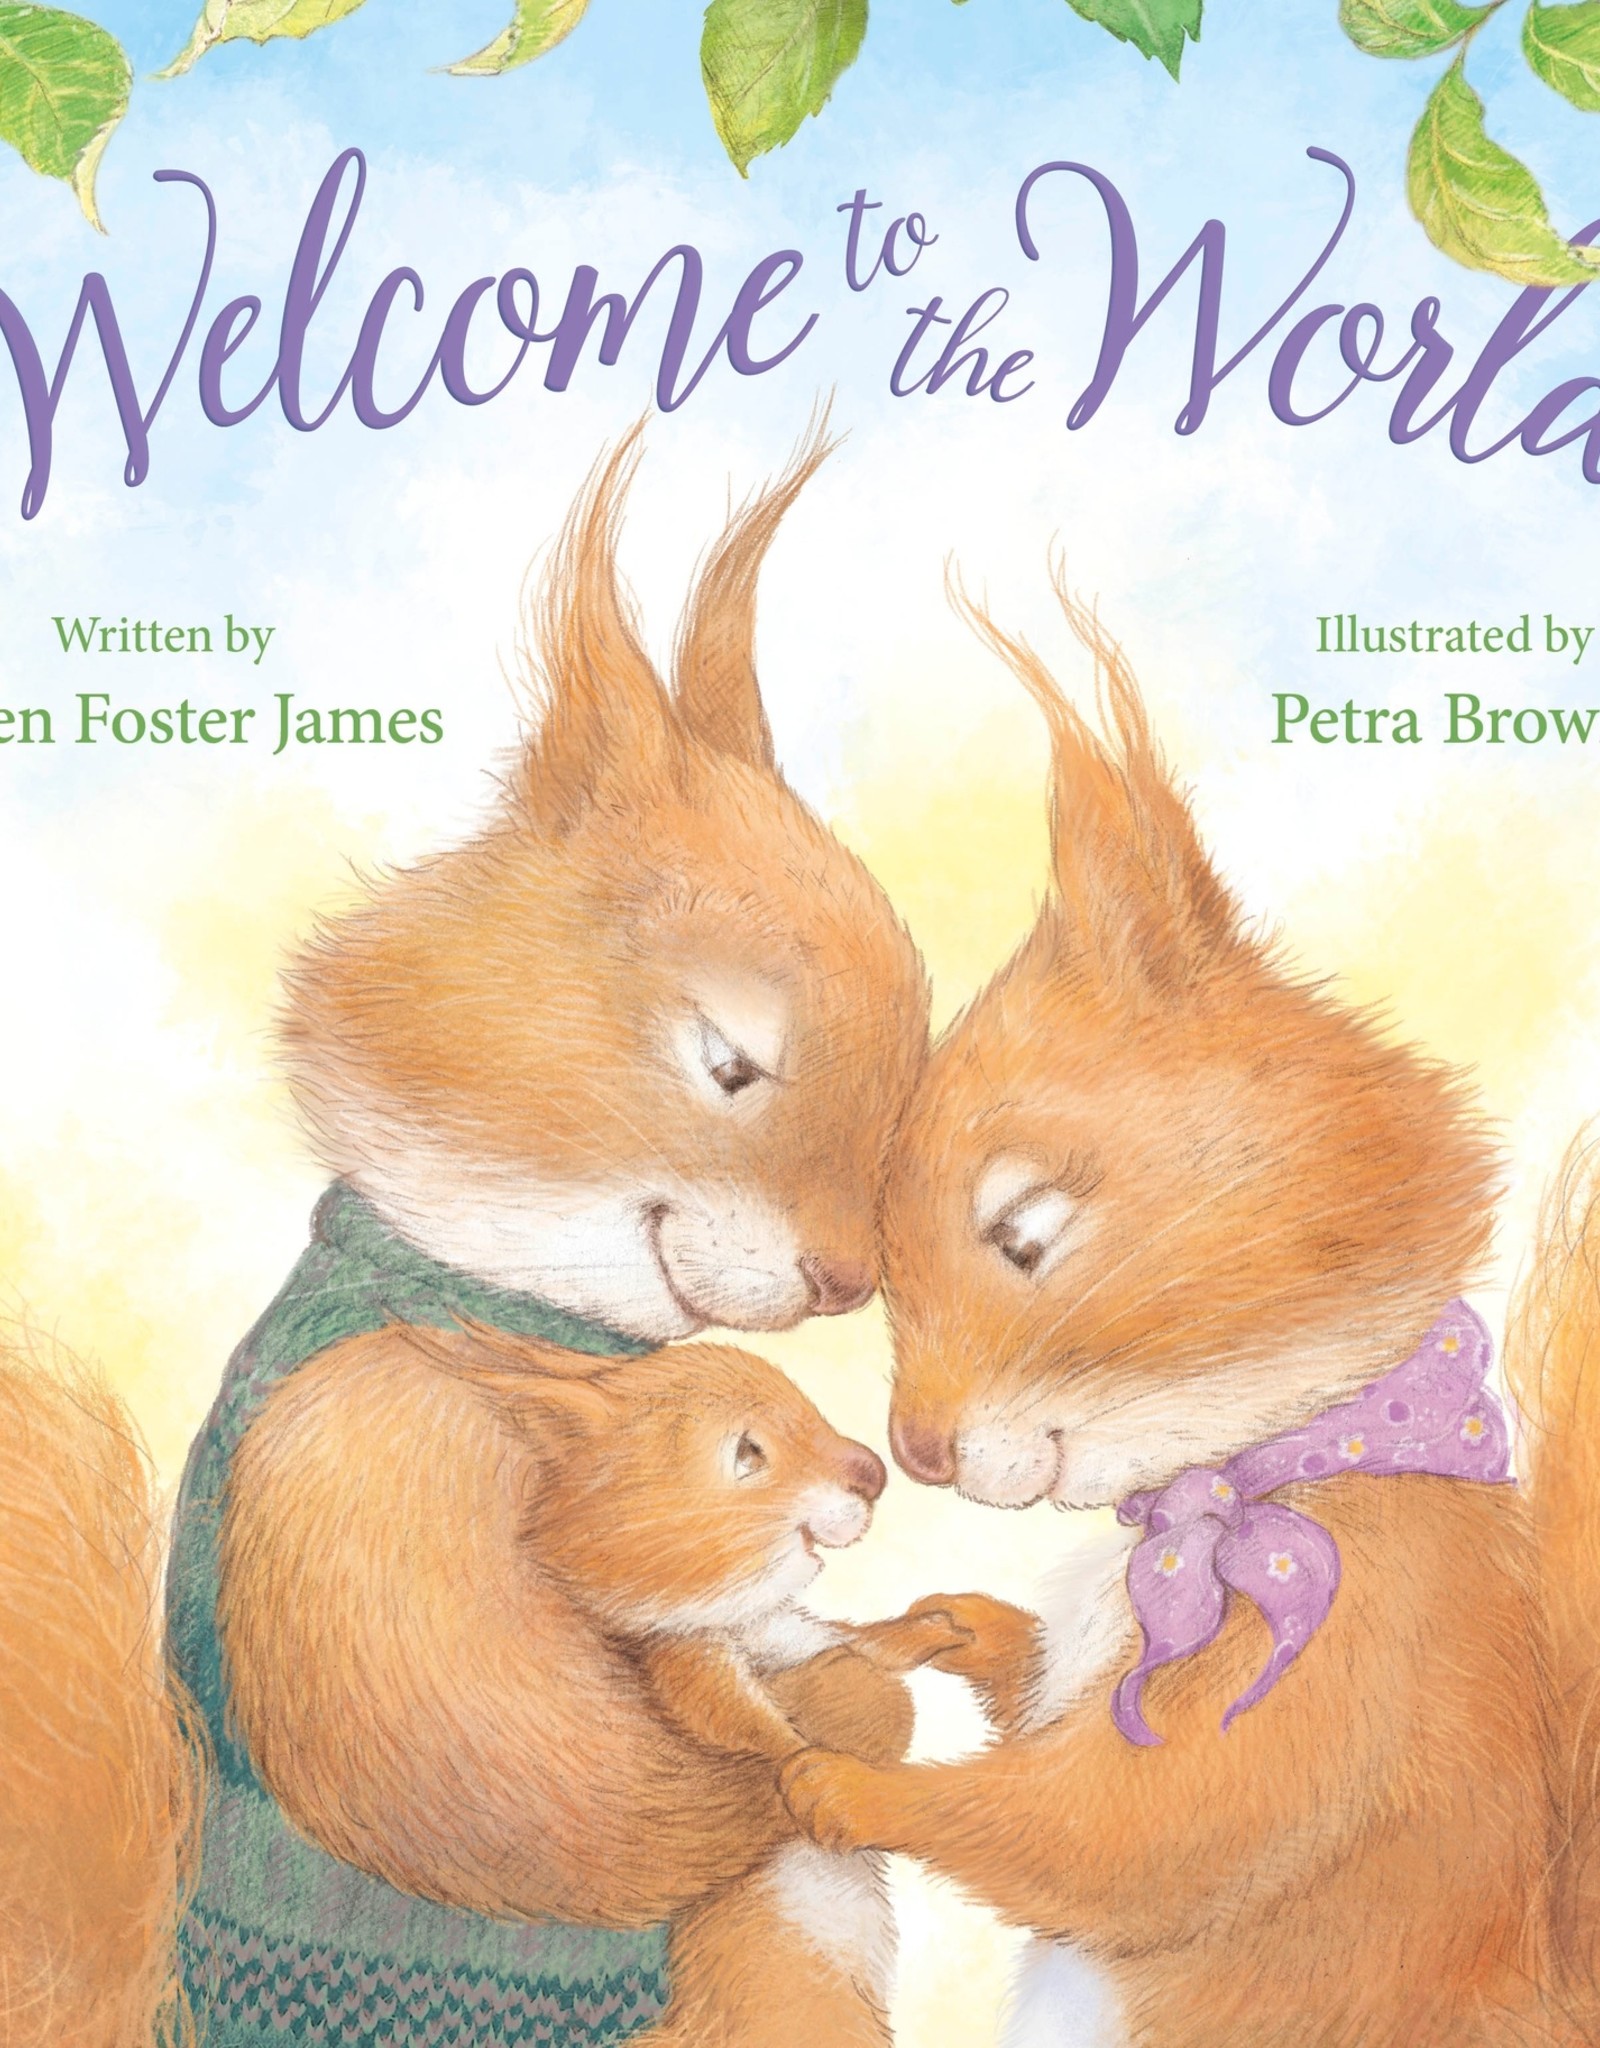 Sleeping Bear Press Welcome to the World book